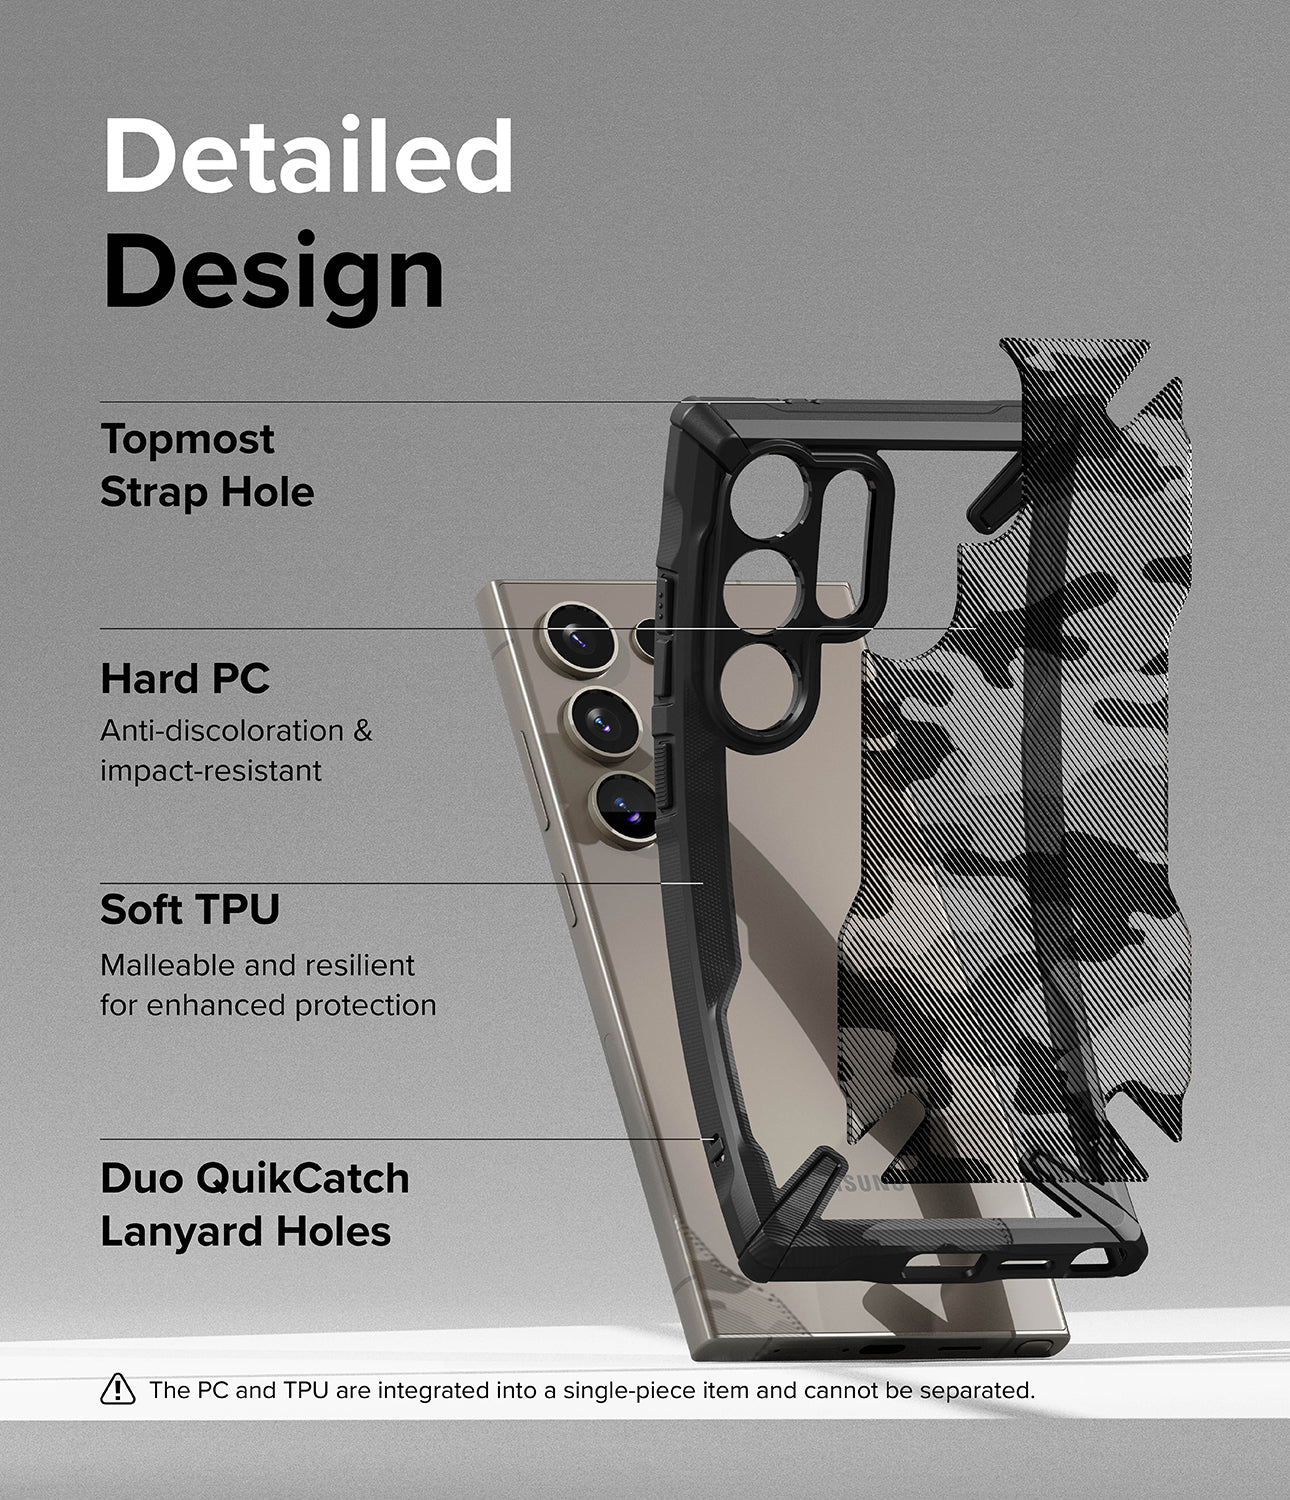 Galaxy S24 Ultra Case | Fusion-X - Detailed Design. Topmost Strap Hole. Anti-discoloration and impact-resistant with Hard PC. Malleable and resilient for enhanced protection with Soft TPU. Duo QuikCatch Lanyard Holes